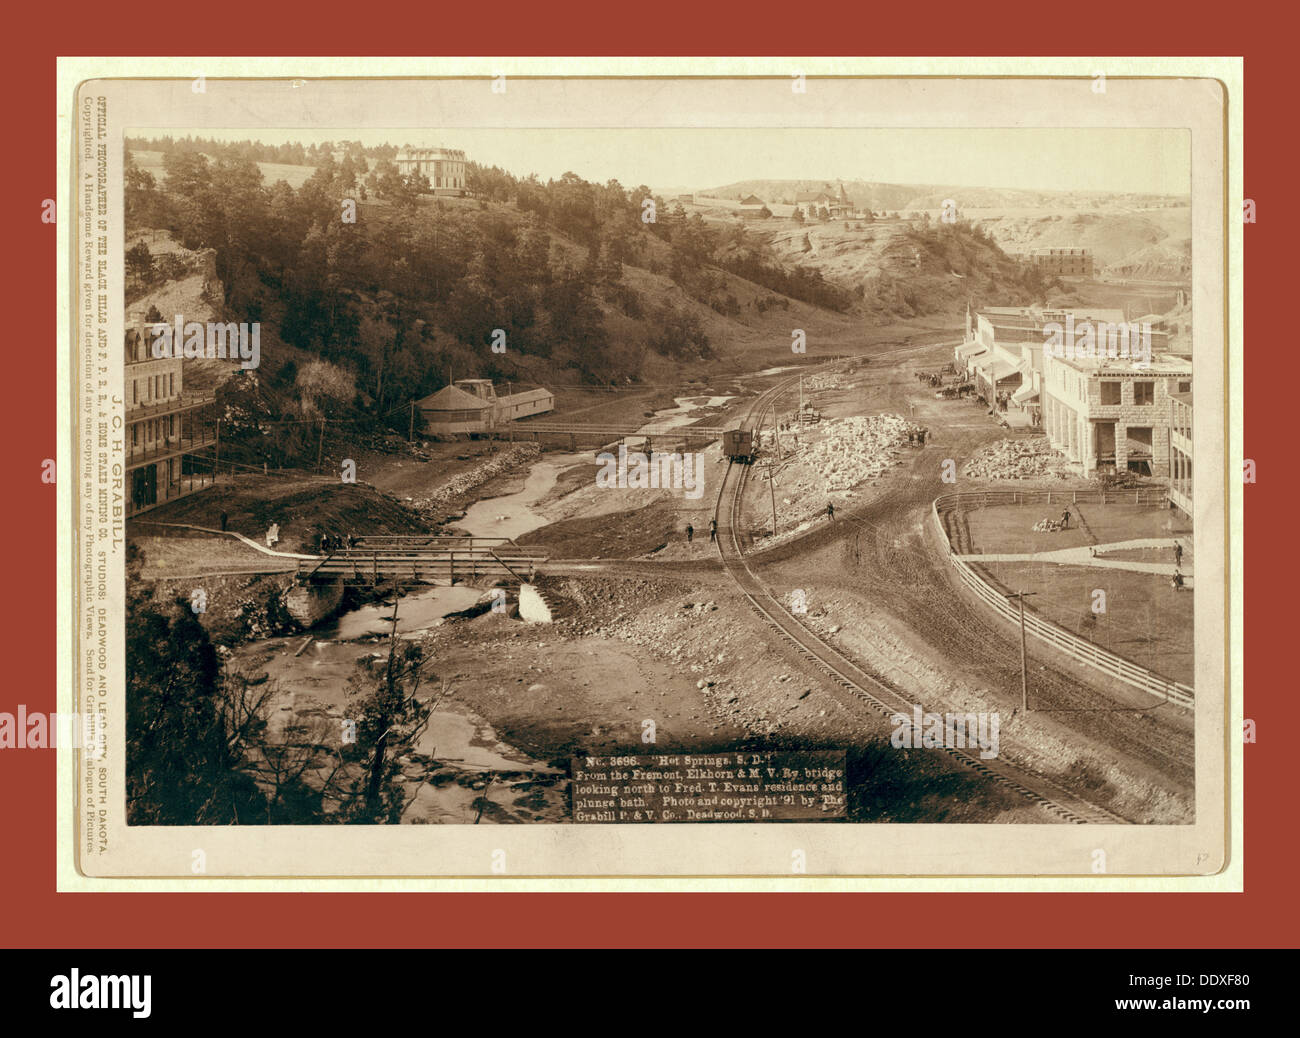 Hot Springs, S.D. From the Fremont, Elkhorn and M.V. Ry. Stock Photo